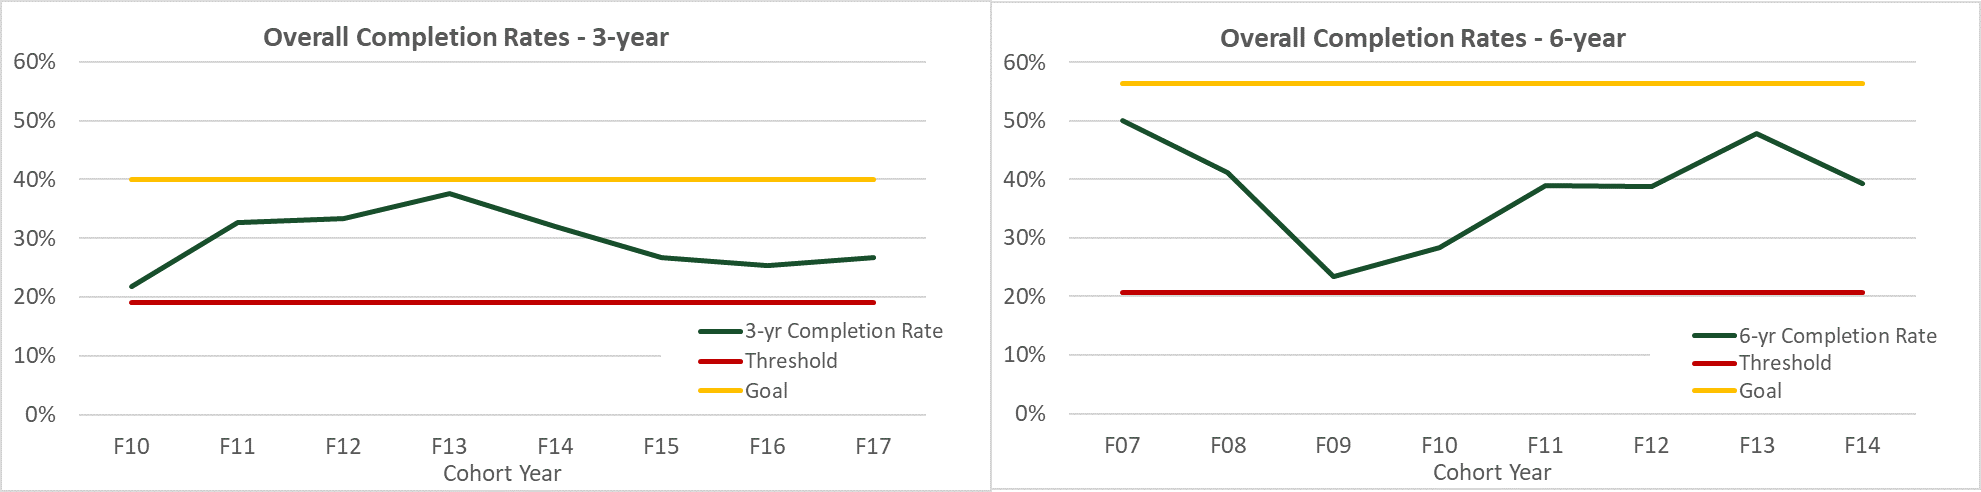 Graduate student overall (a) 3-year and (b) 6-year completion rates